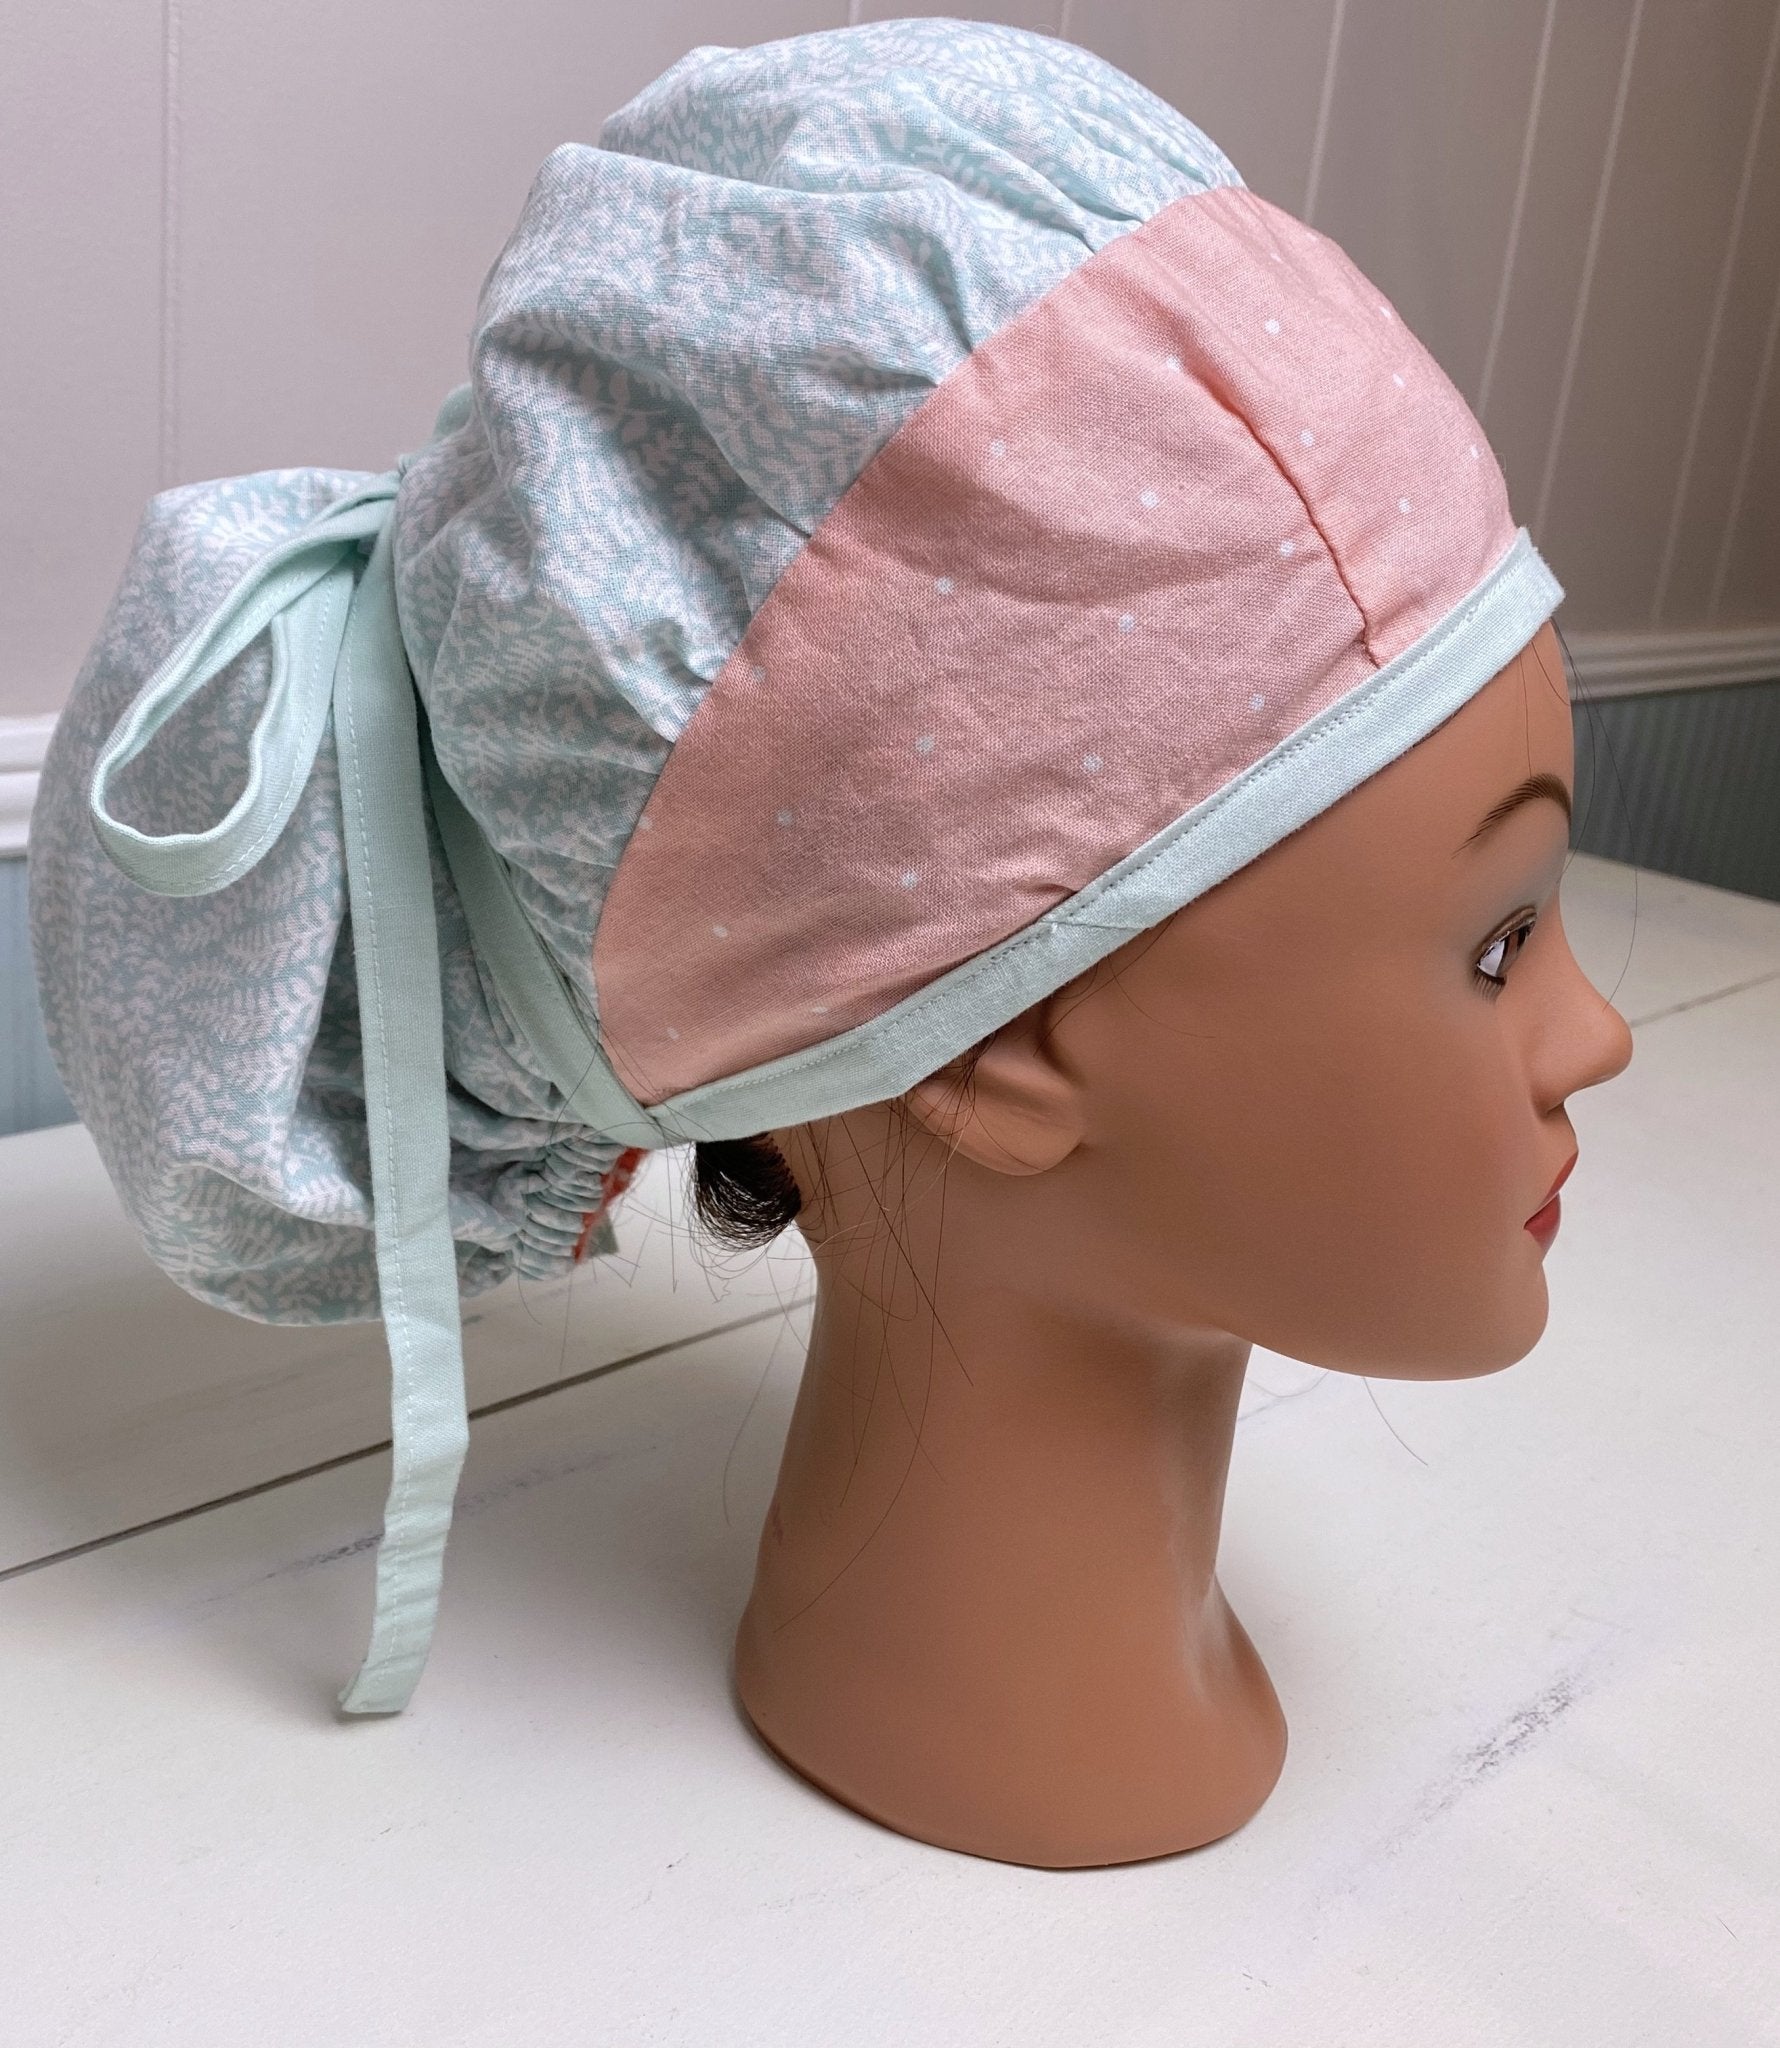 Bouffant Scrub Cap with Pony Tail- Painted Floral and Dots - The Southern Nest